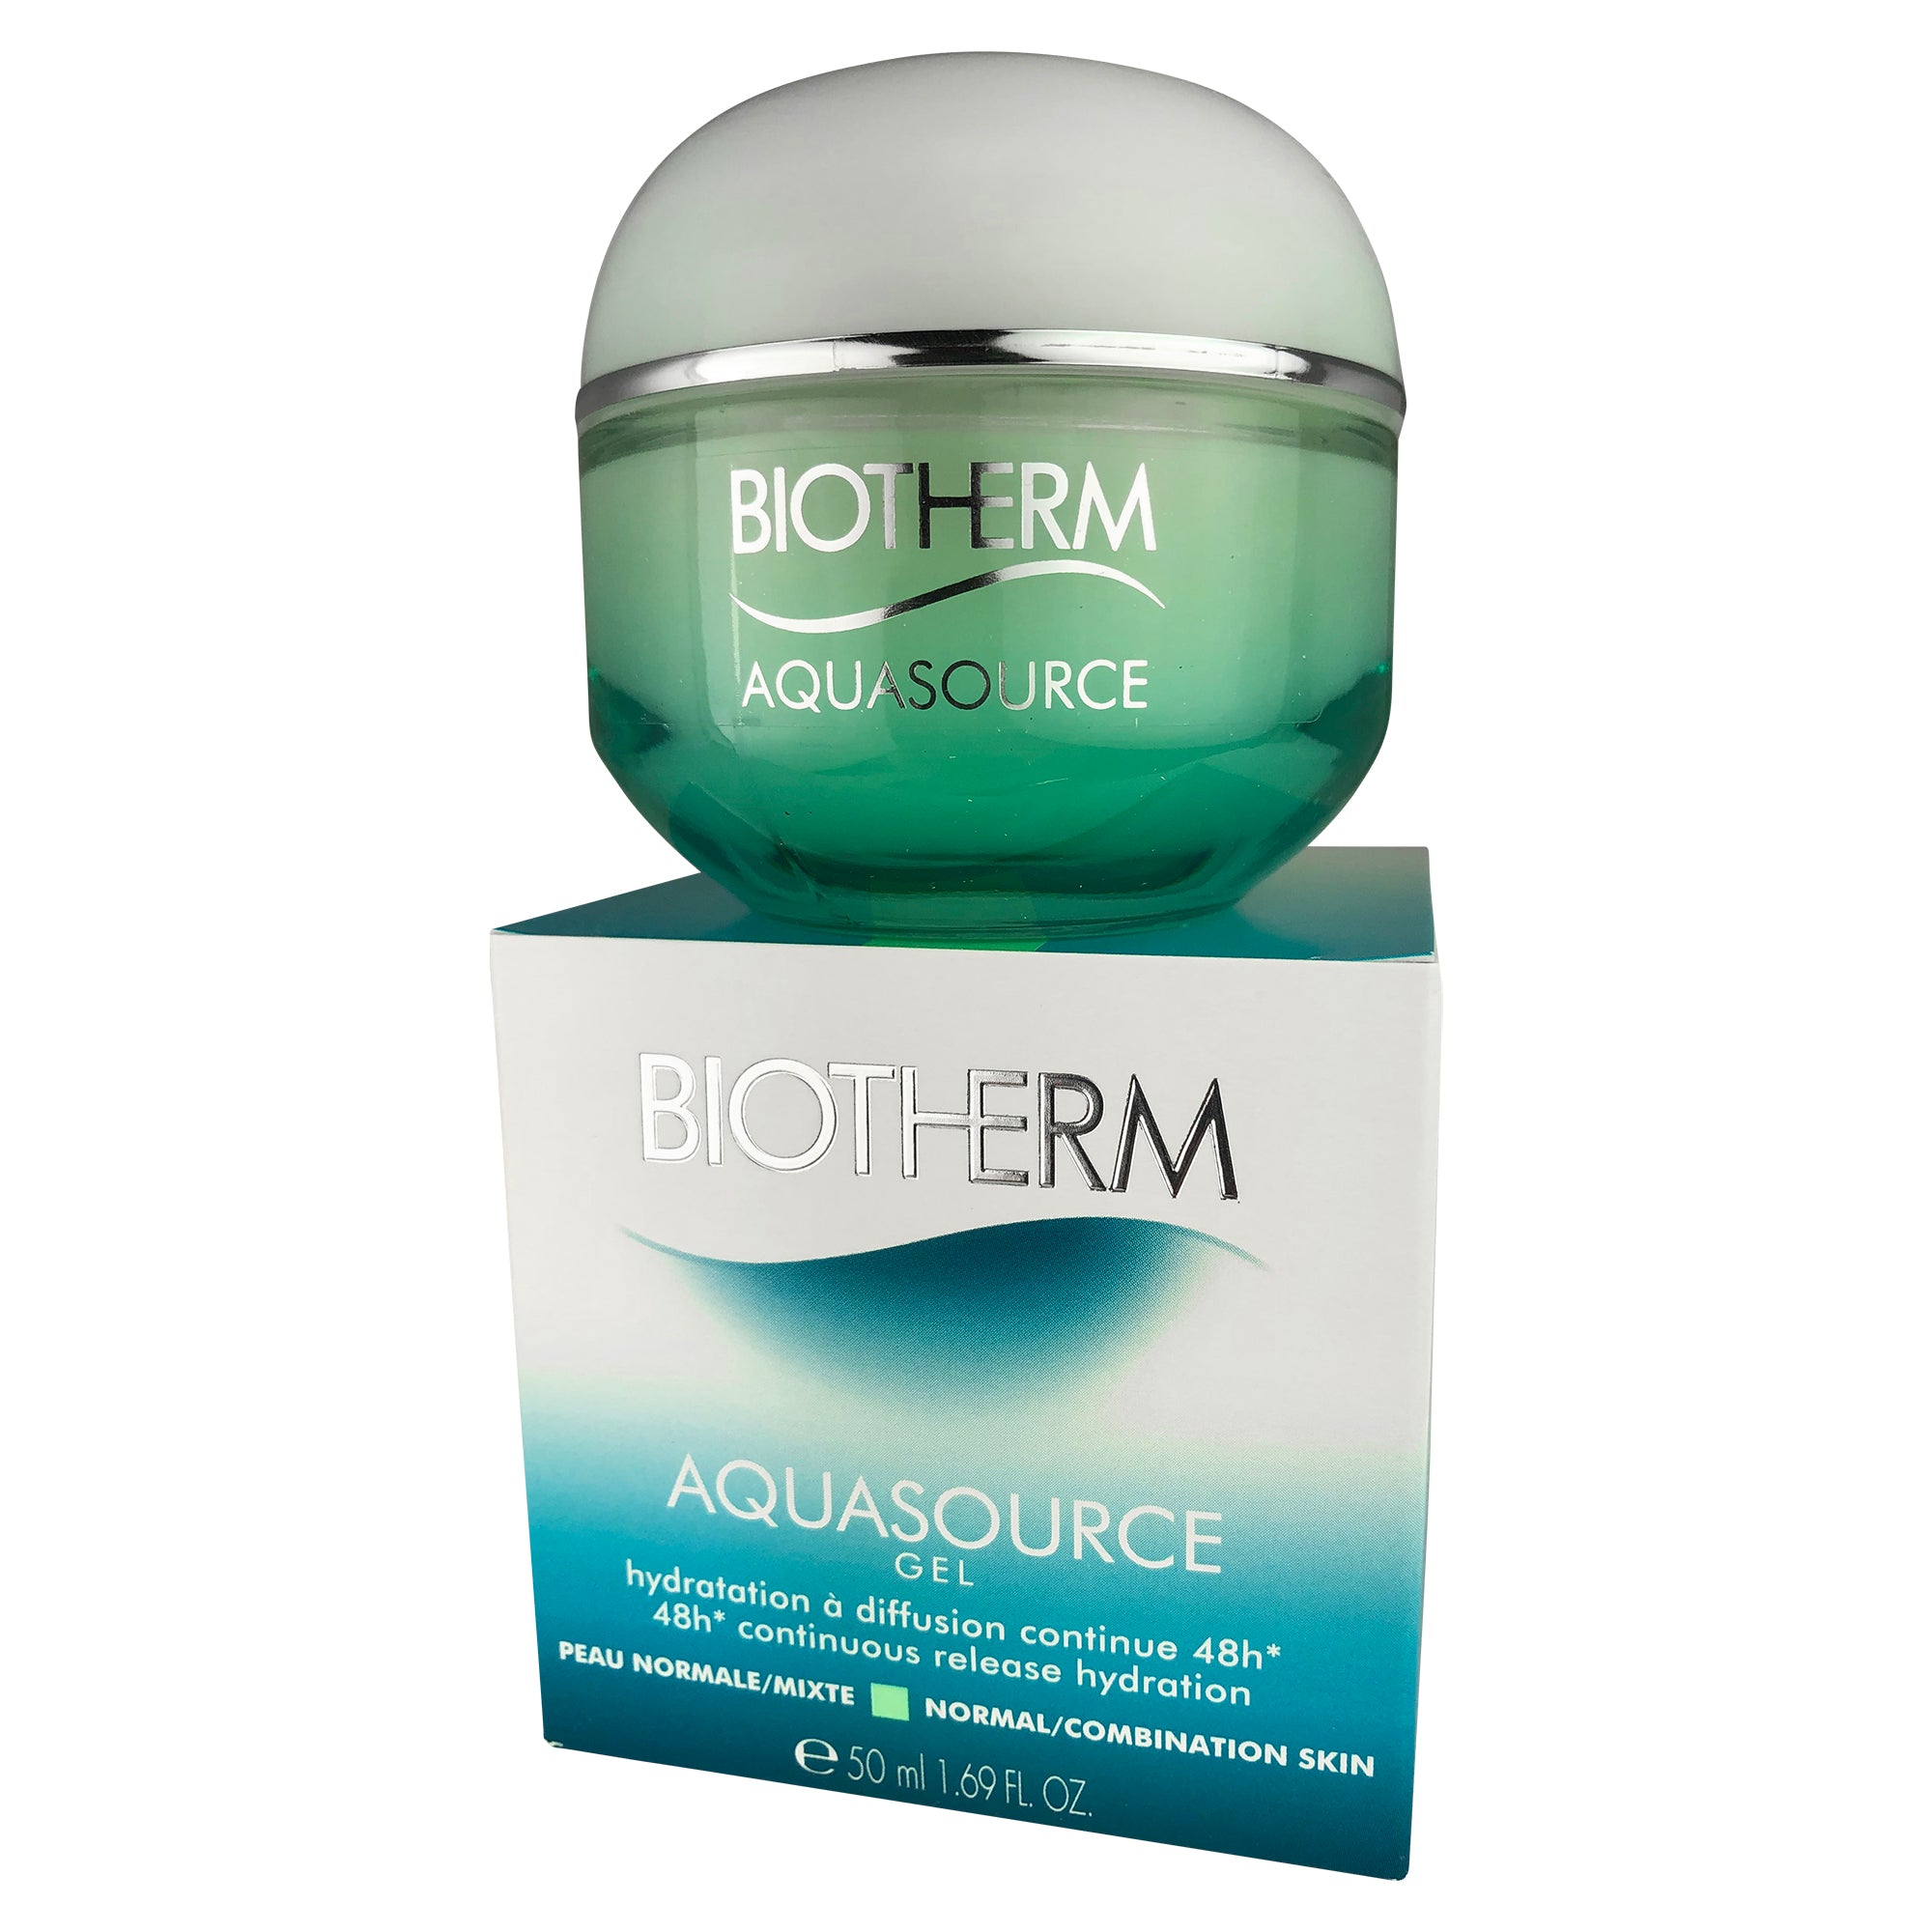 Biotherm Aquasource Face Gel 48 hr Hydration Normal to Combination Skin 1.69 oz